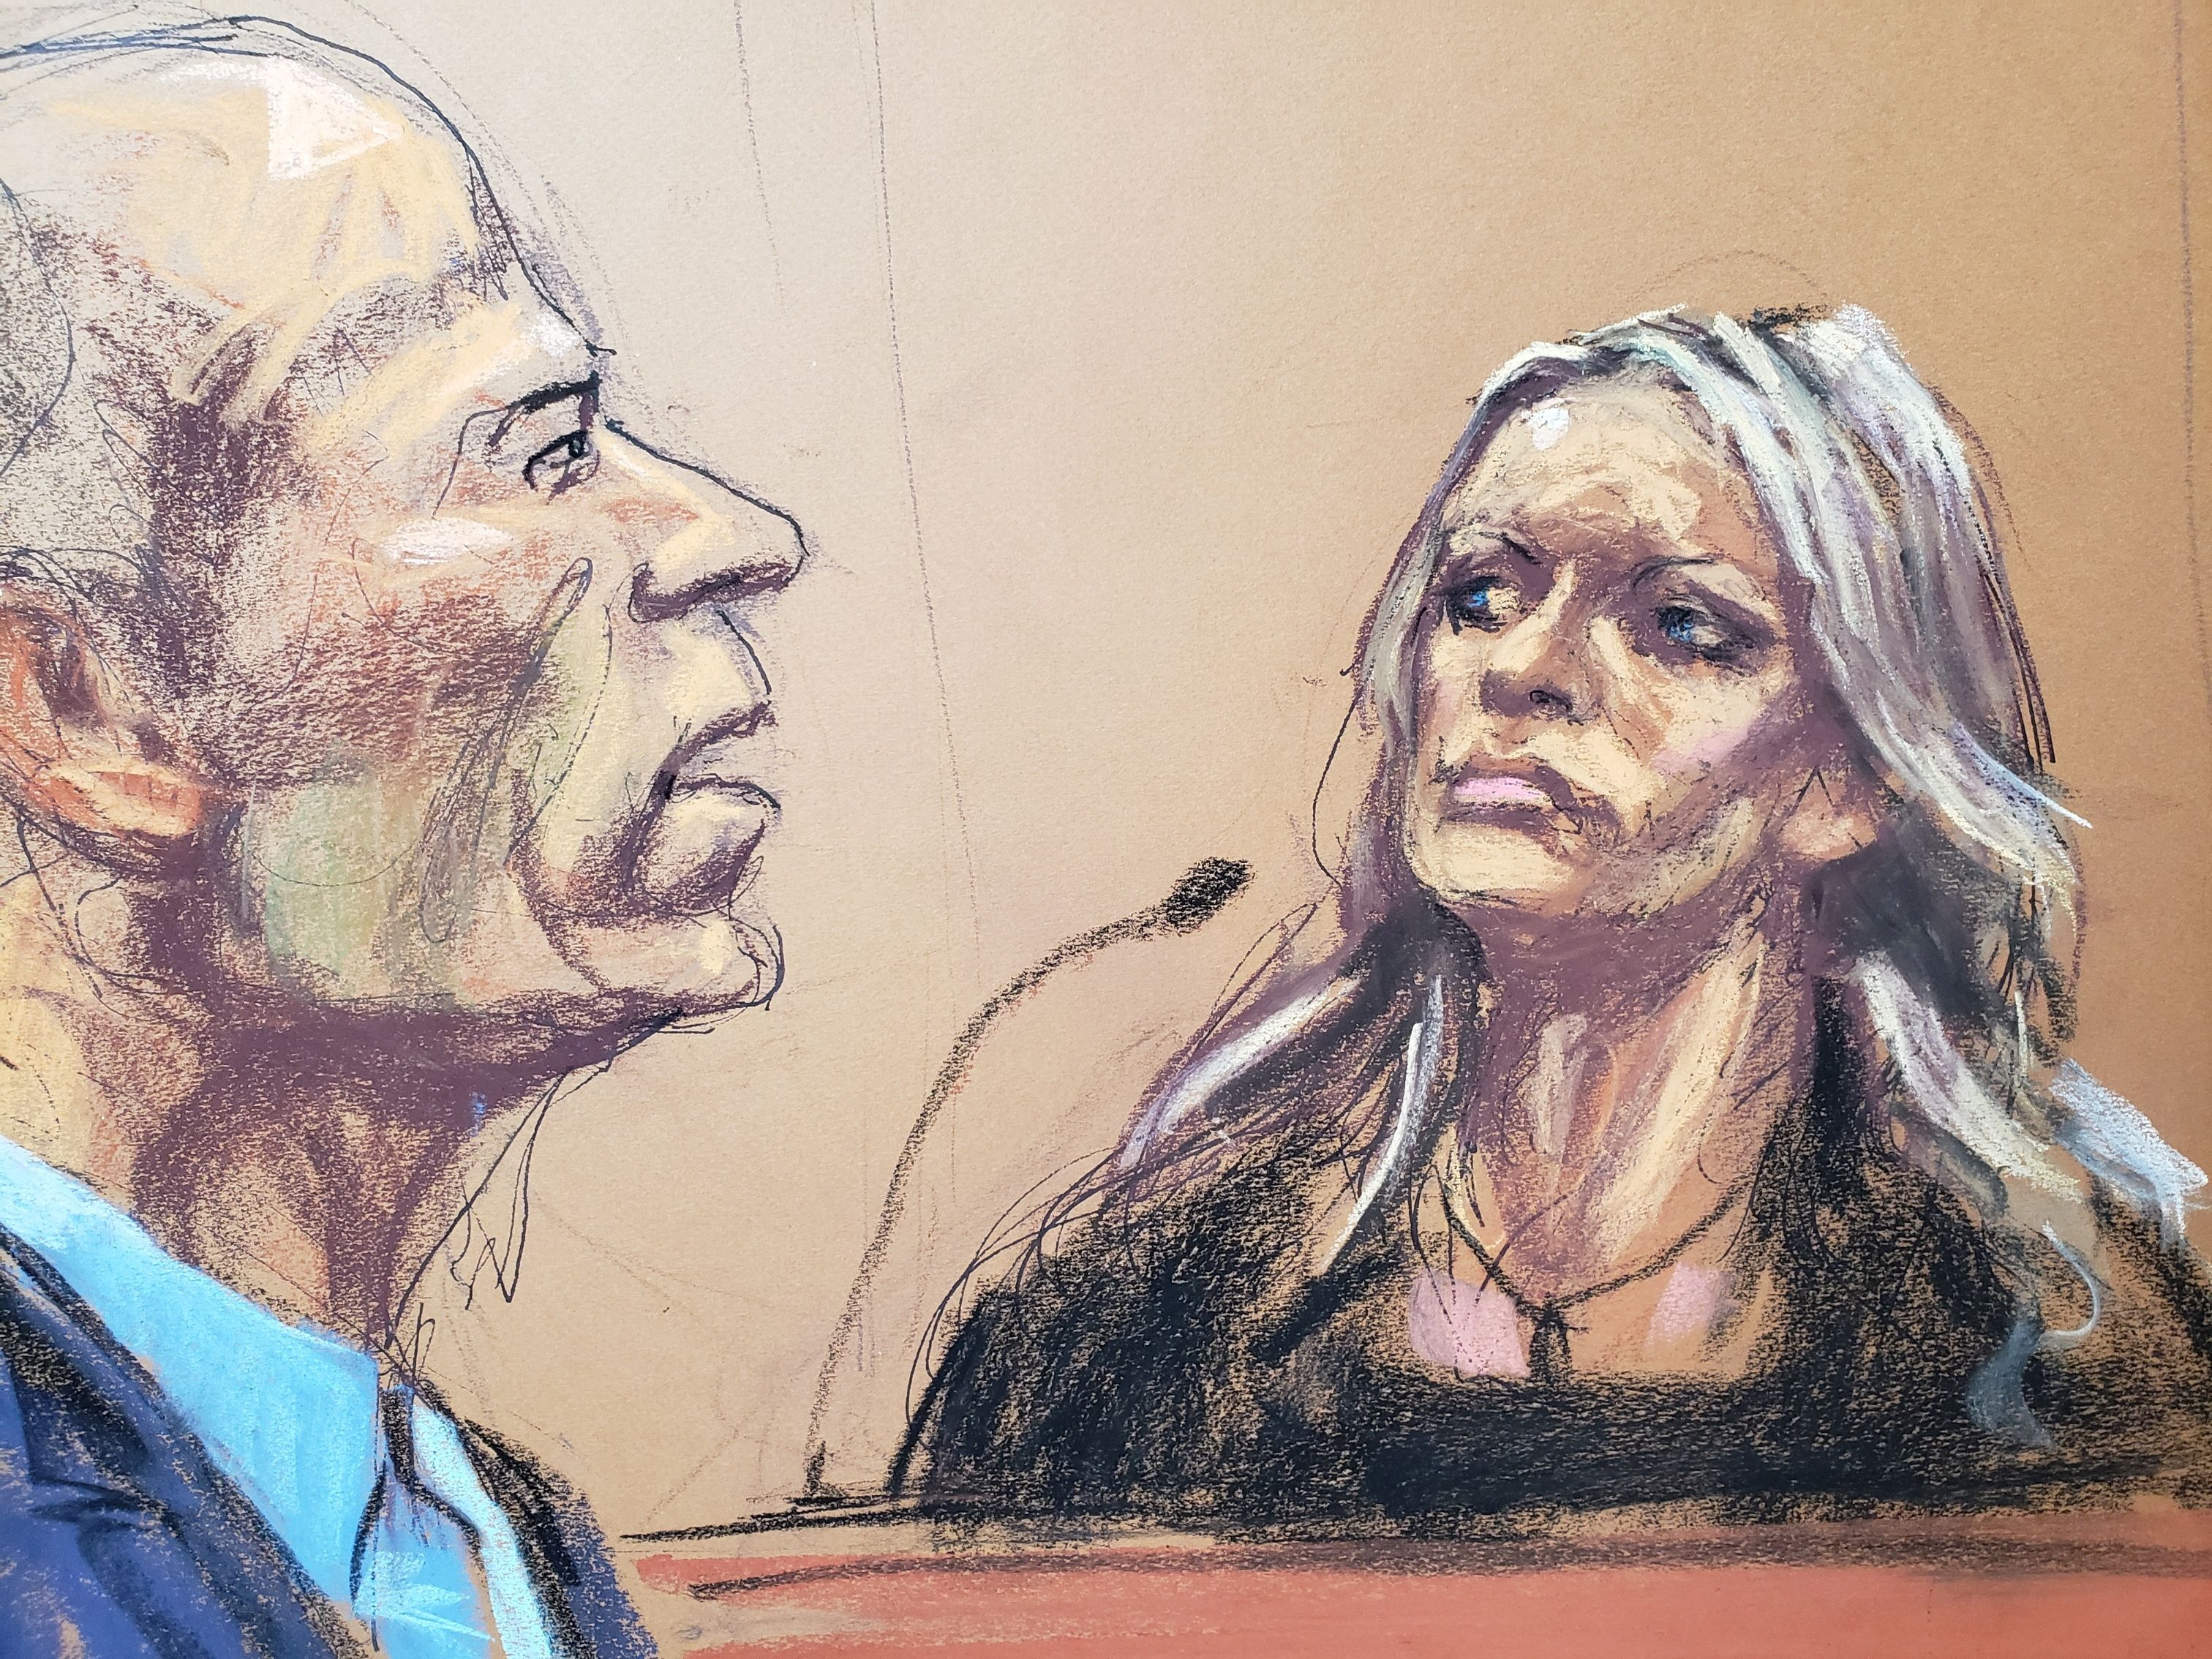 Former attorney Michael Avenatti cross-examines witness Stormy Daniels during his criminal trial at the United States Courthouse in the Manhattan borough of New York City, U.S., January 28, 2022 in this courtroom sketch